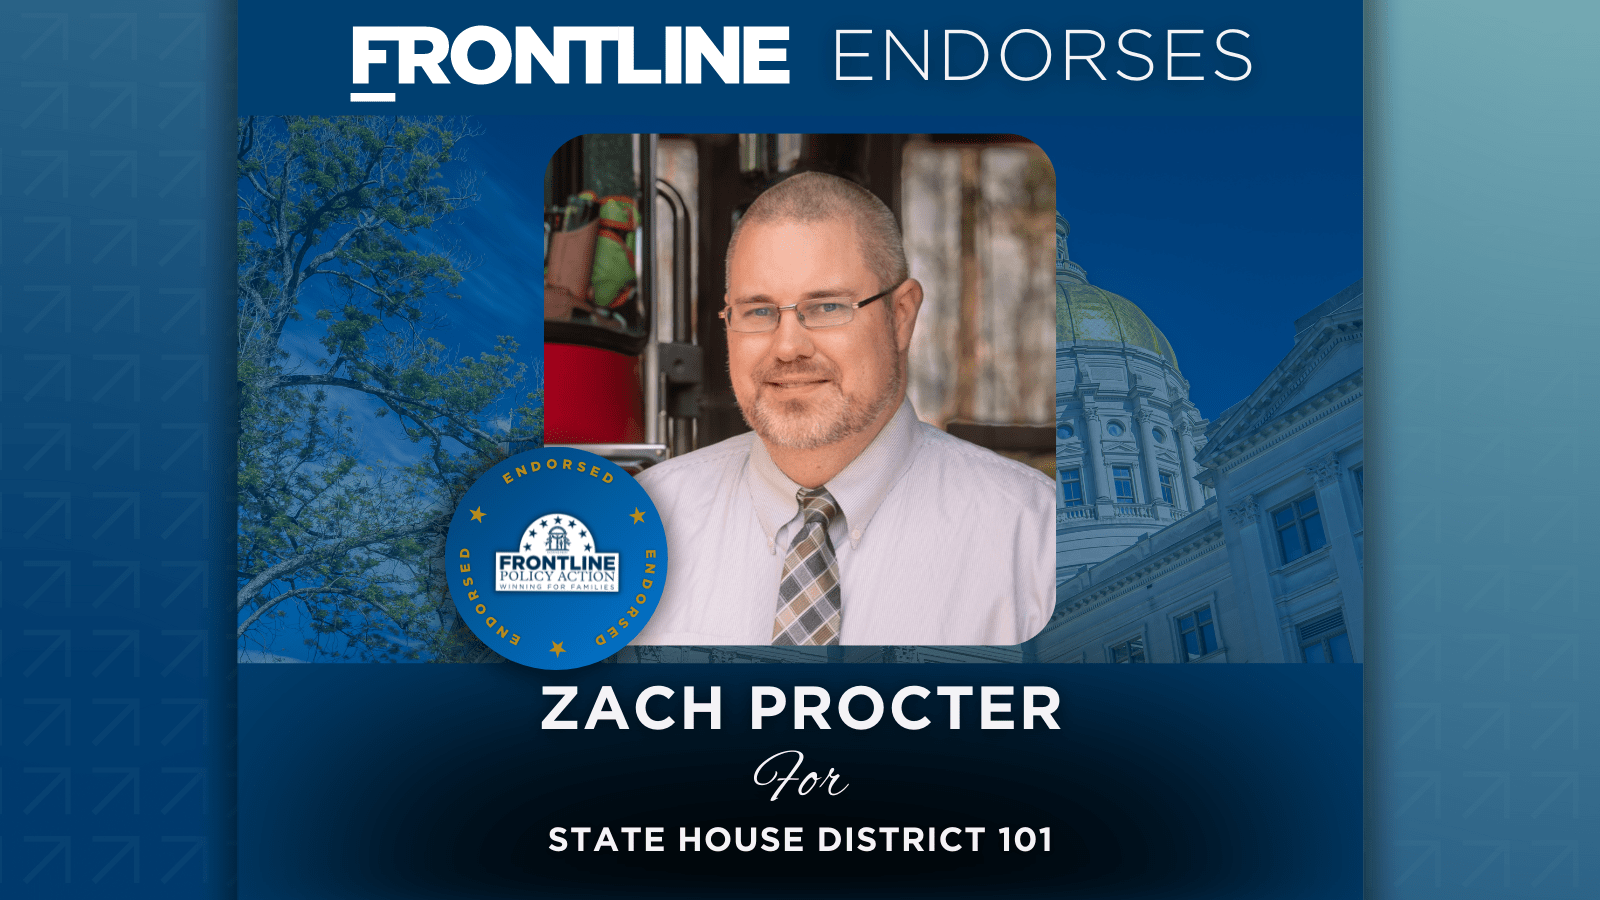 BREAKING: Frontline Endorses Zach Procter for State House District 101